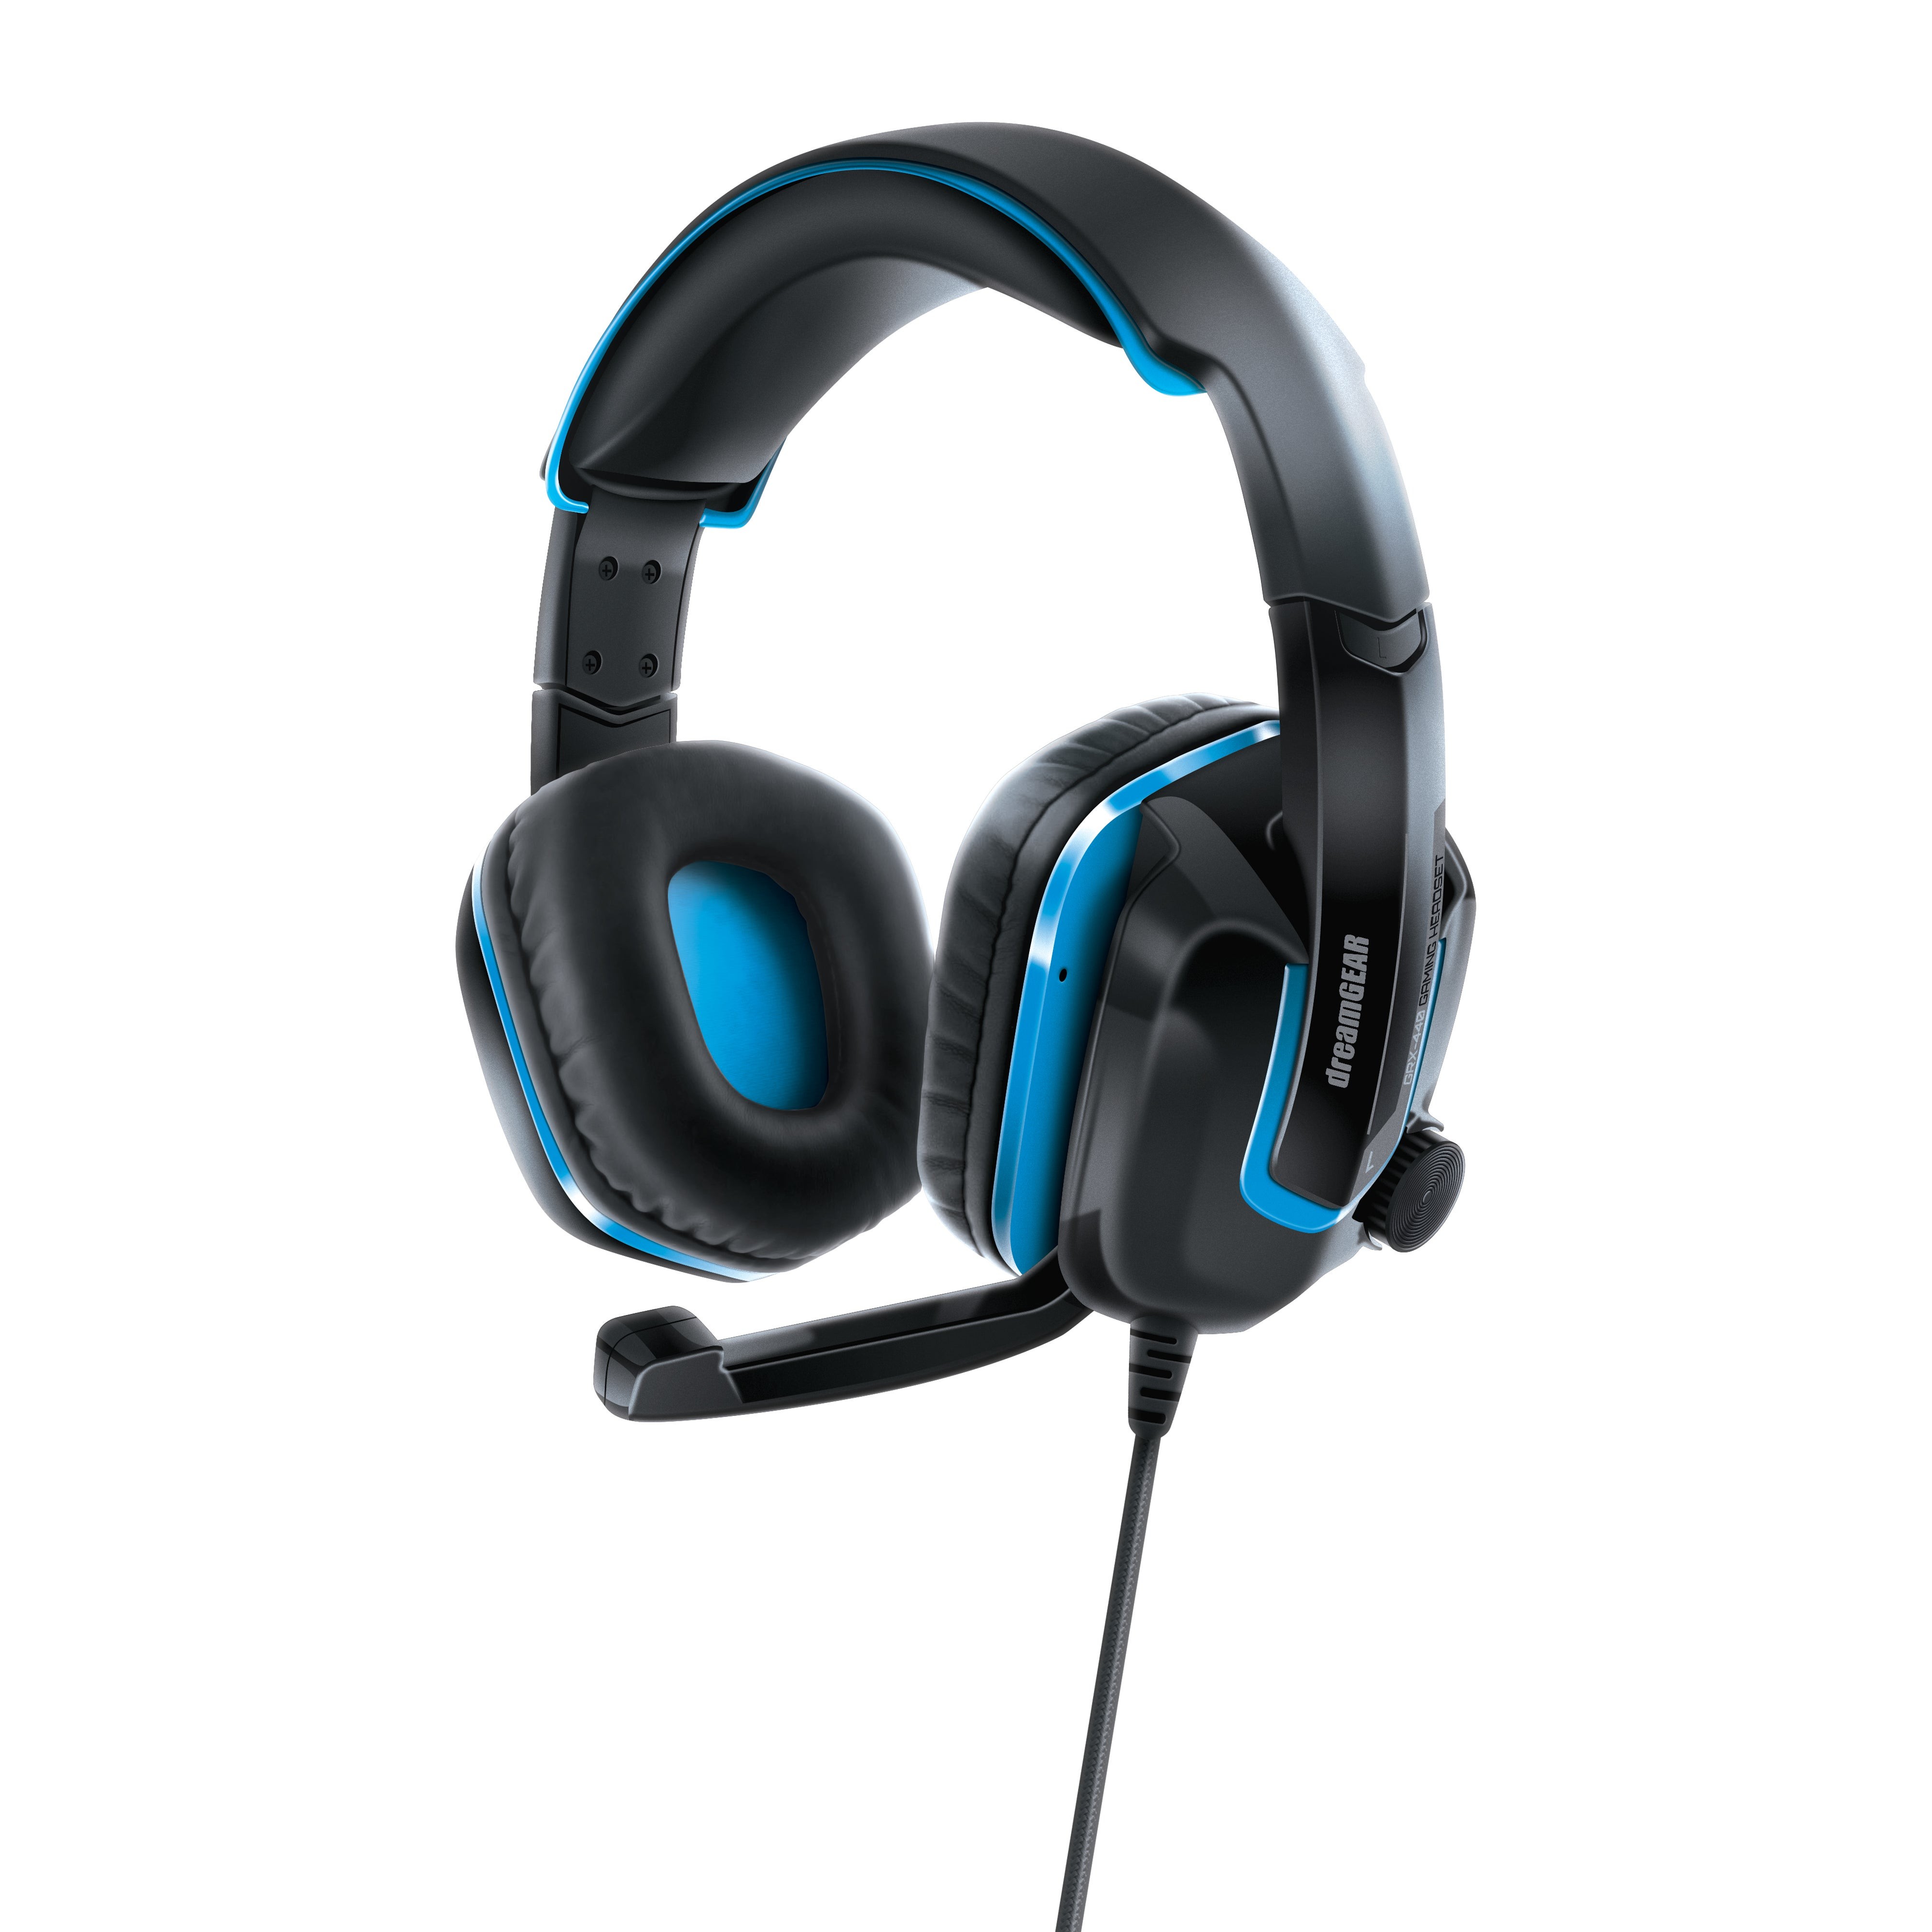 GRX-440 Advanced Gaming Headset for Playstation